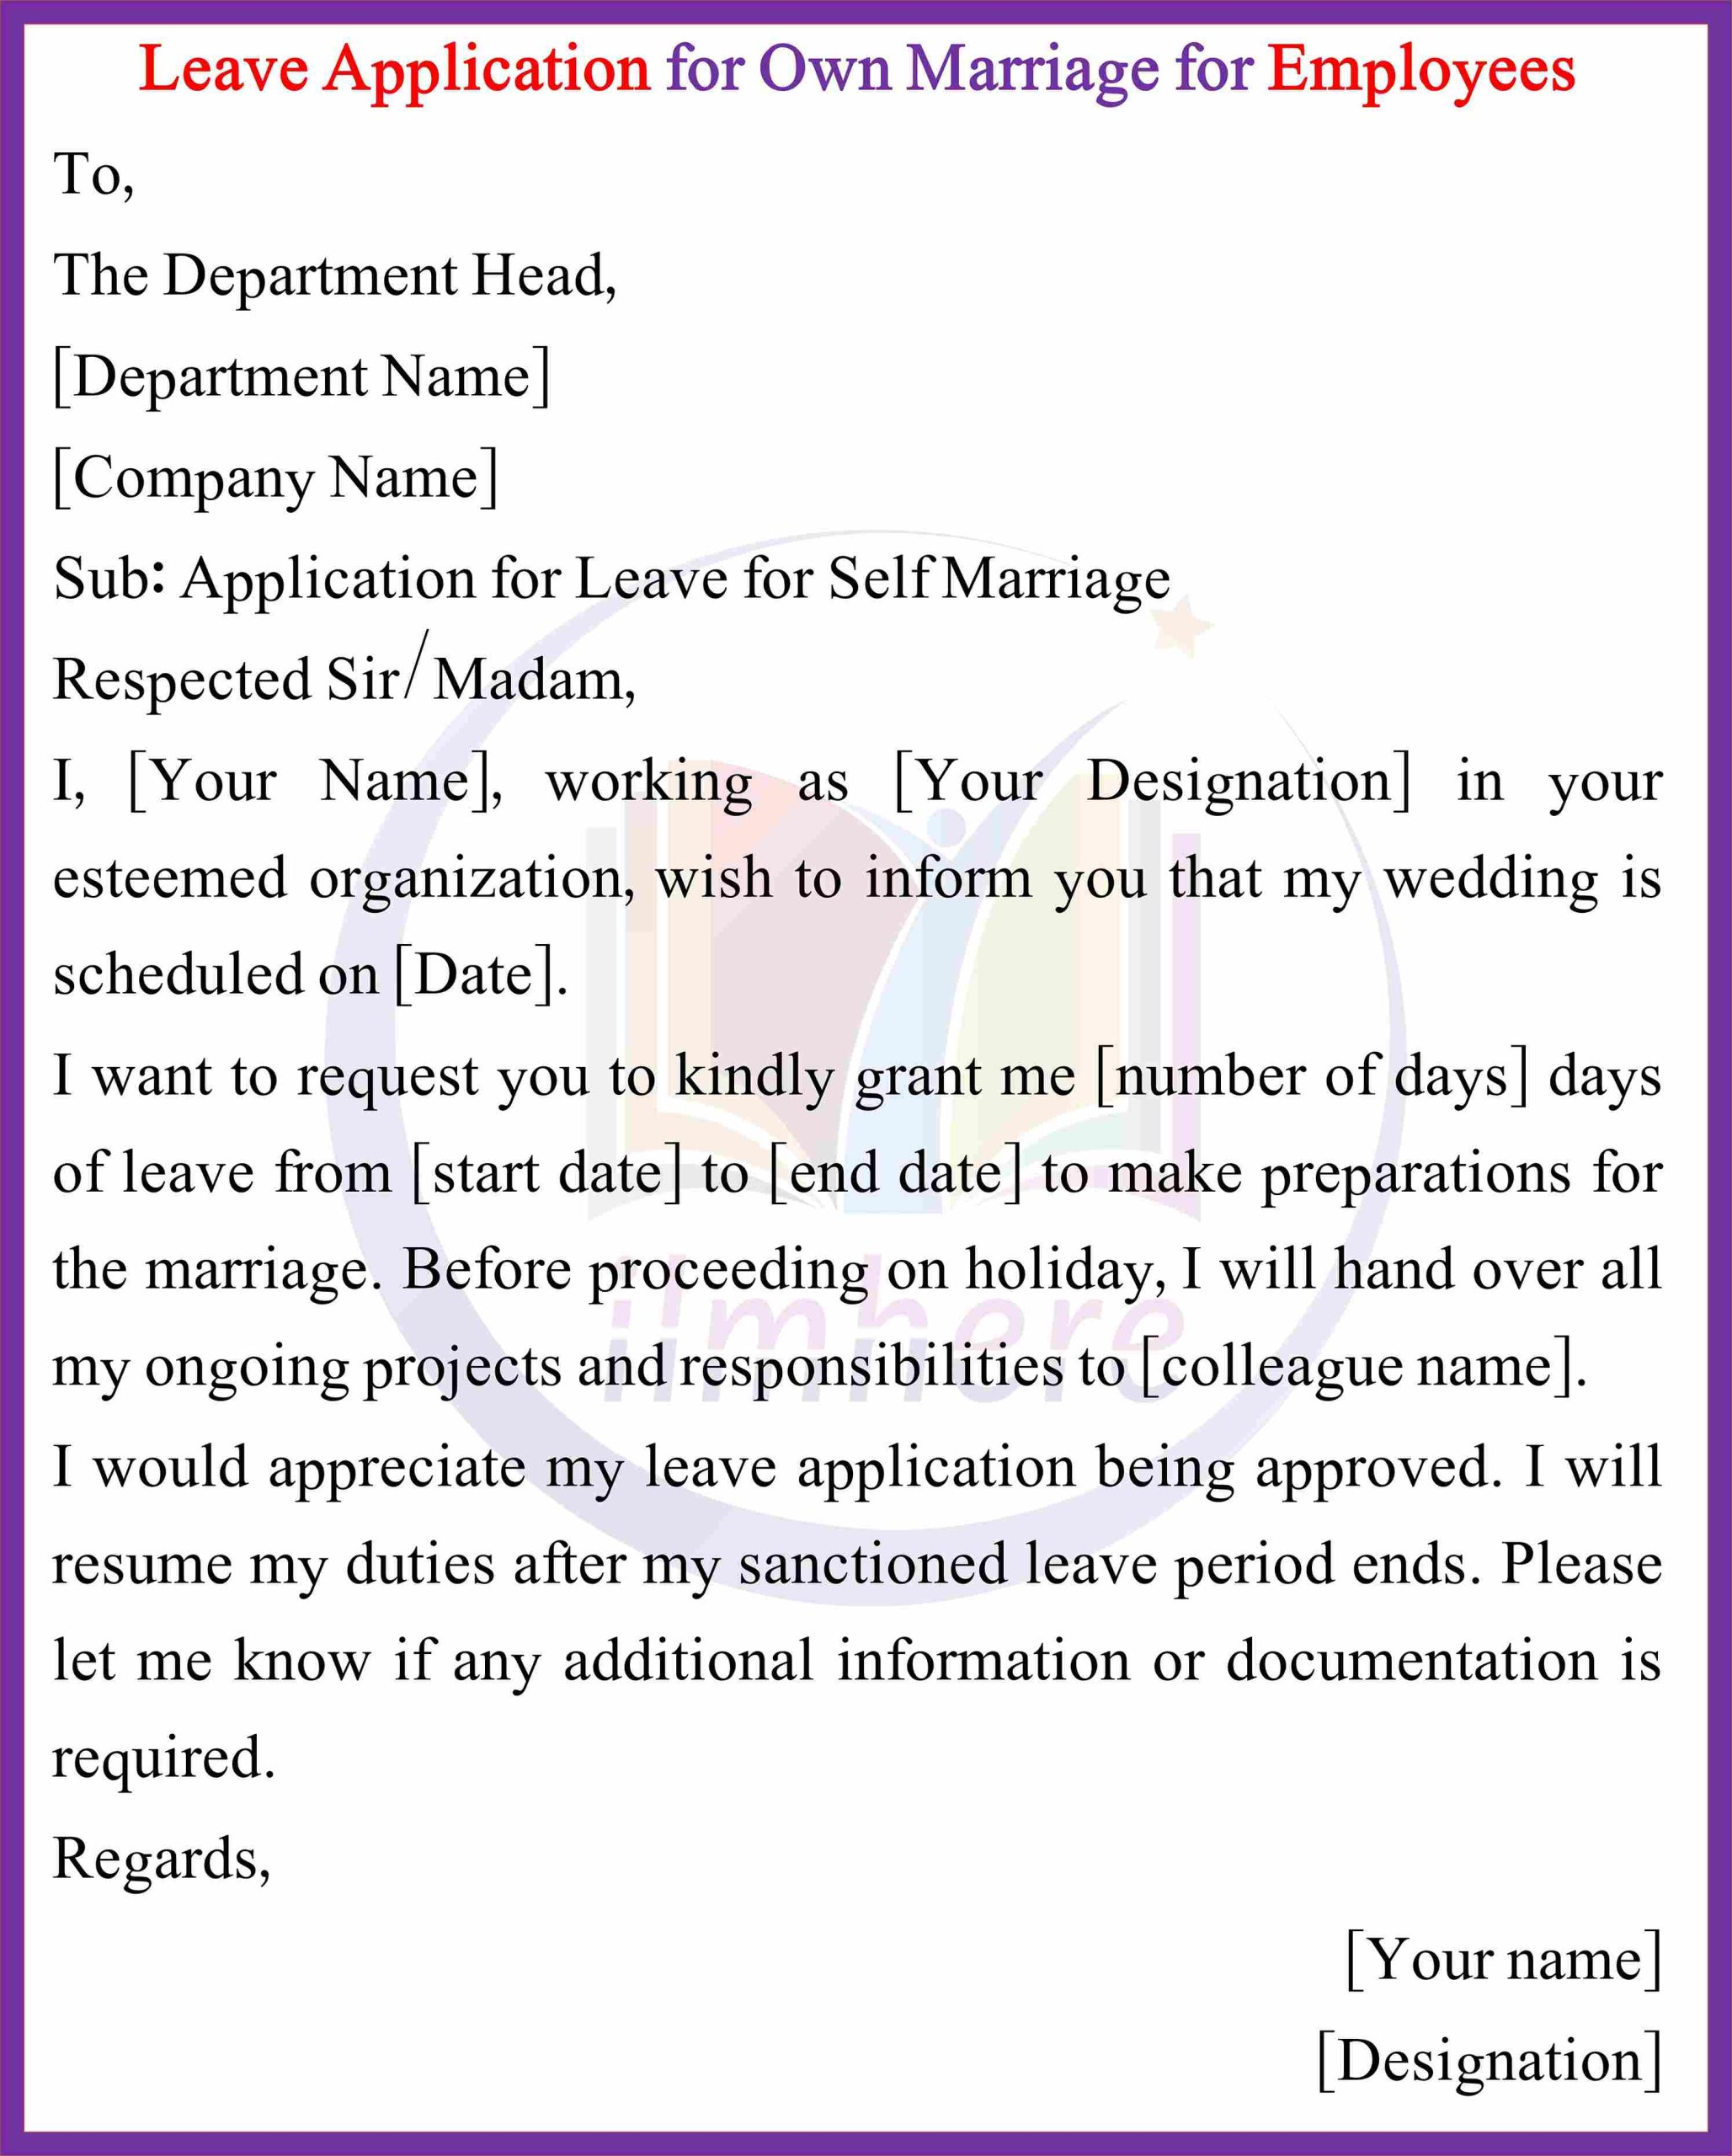 Leave Application for Own Marriage for Employees